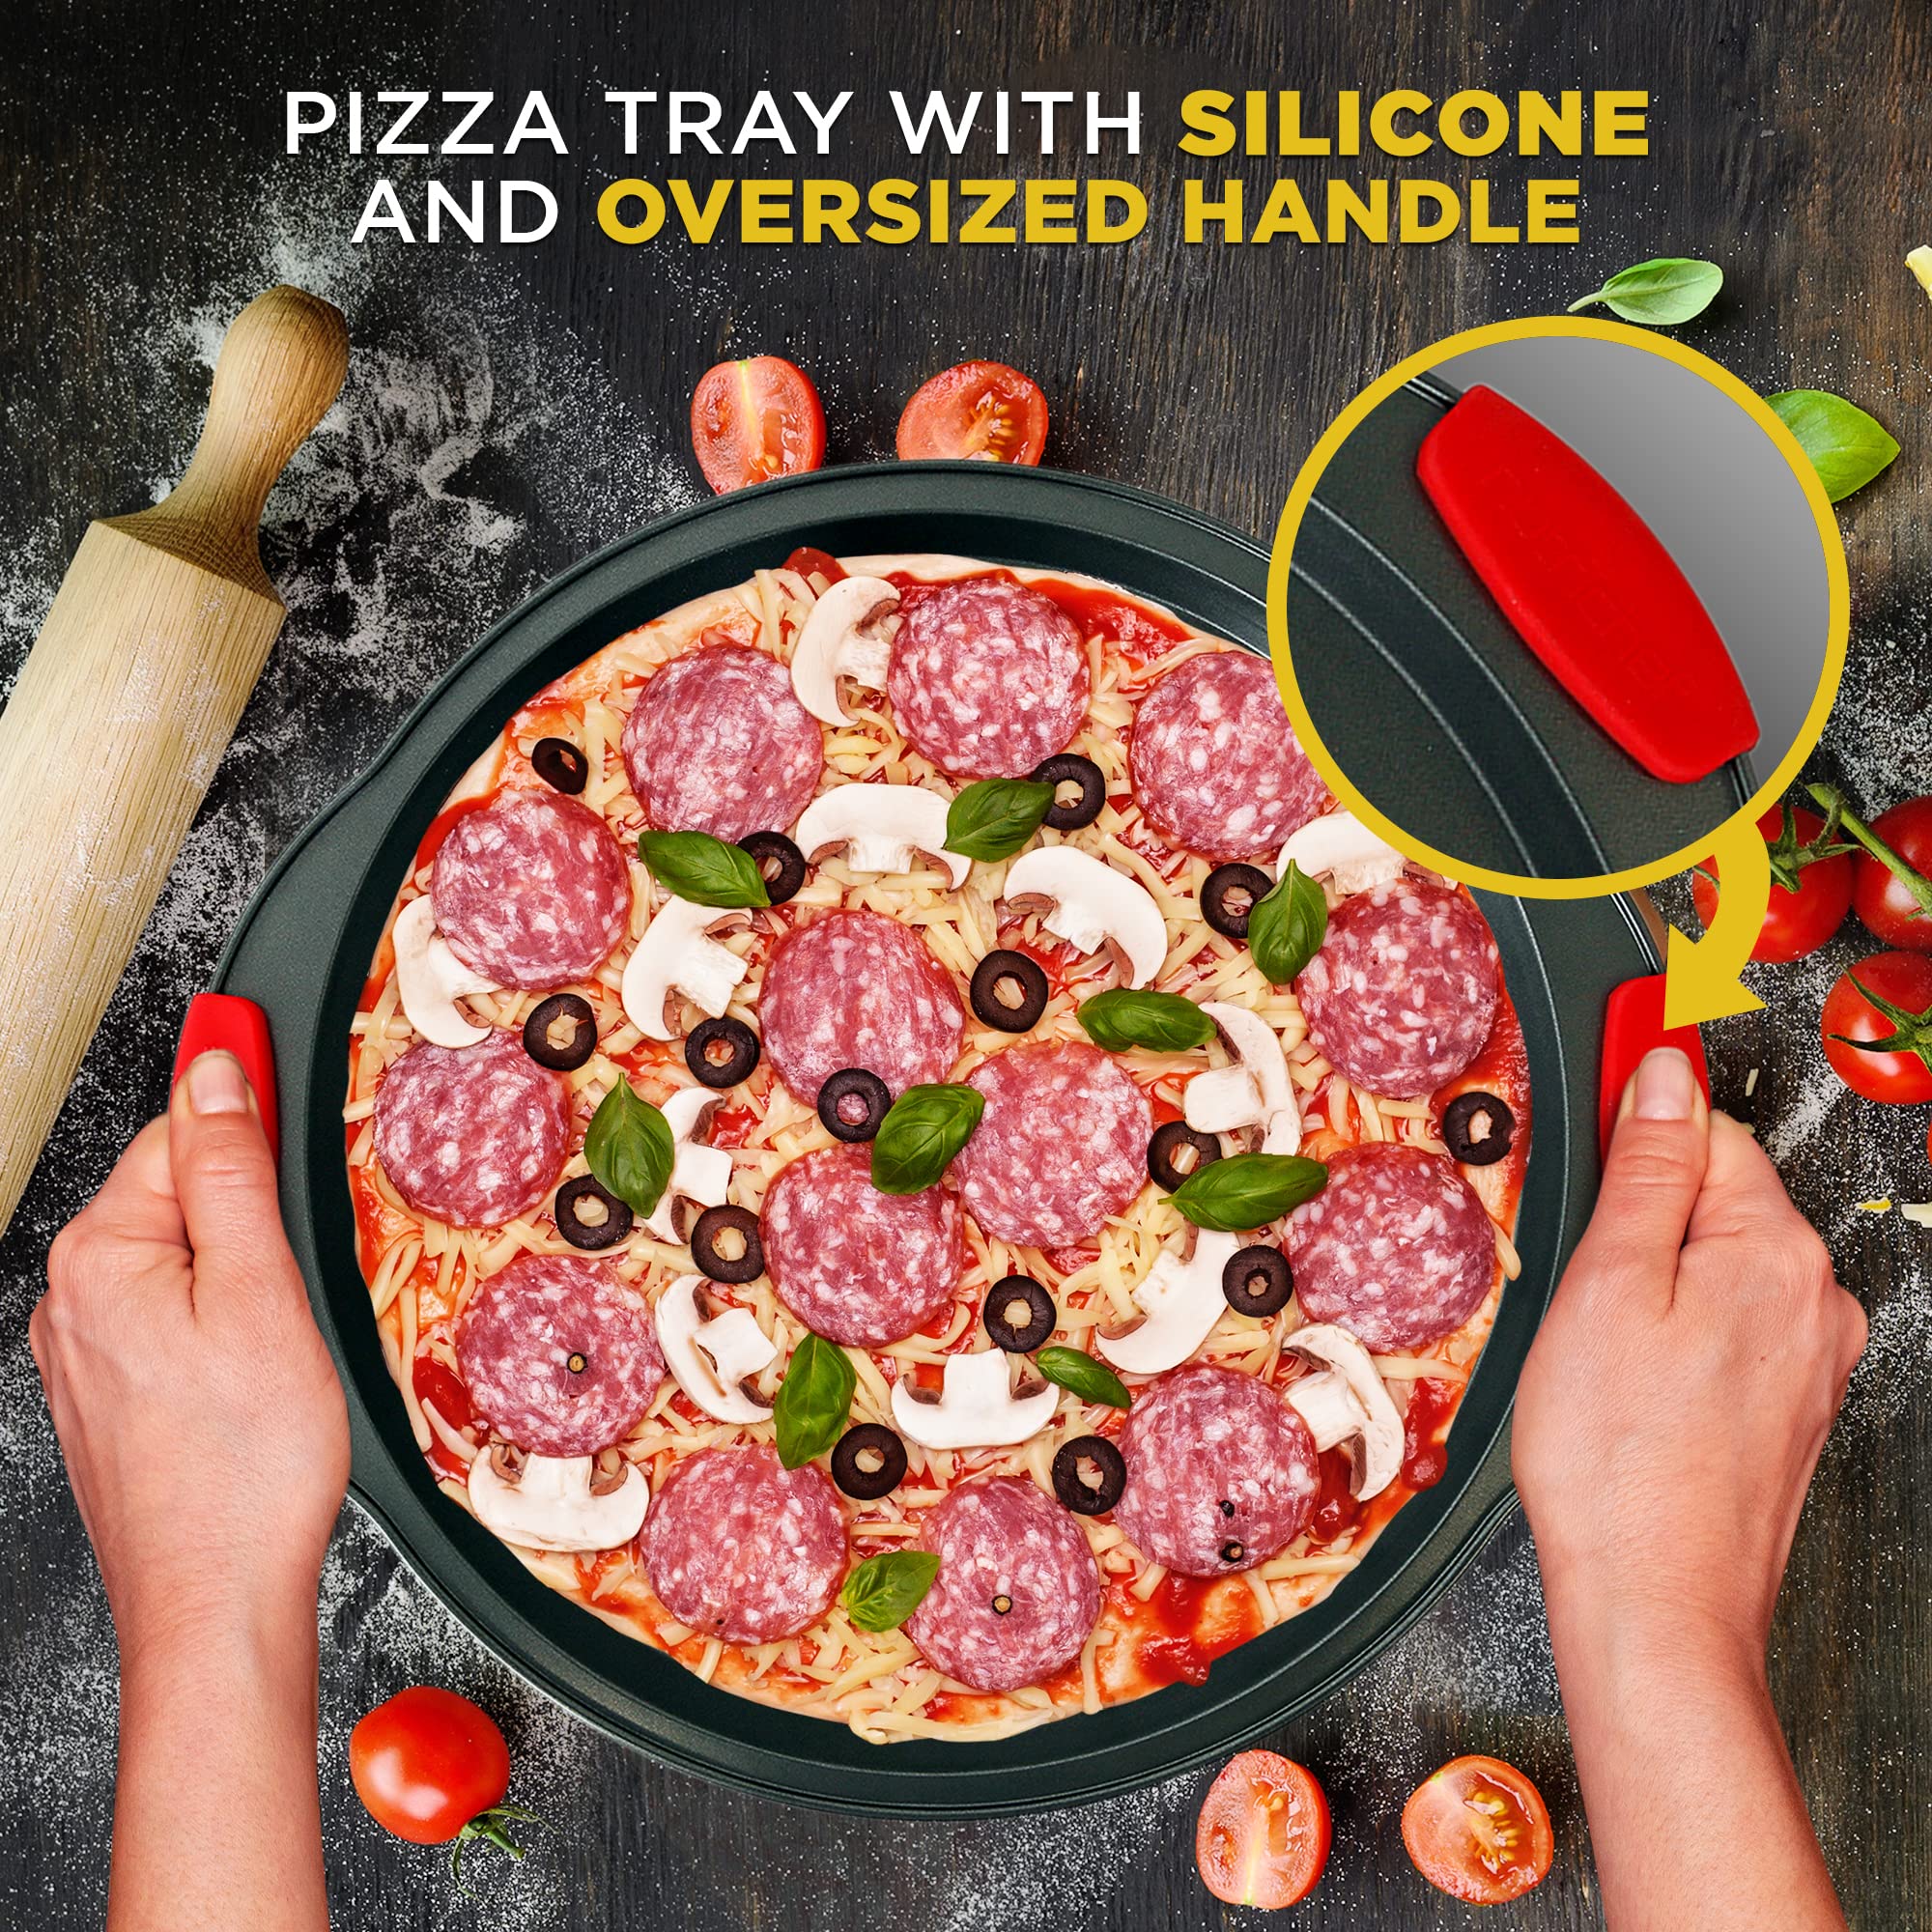 NutriChef Non-Stick Pizza Tray - with Silicone Handle, Round Steel Non-stick Pan with Perforated Holes, Premium Bakeware, Pizza Tray with Silicone and Oversized Handle, Dishwasher Safe - NCBPIZ3